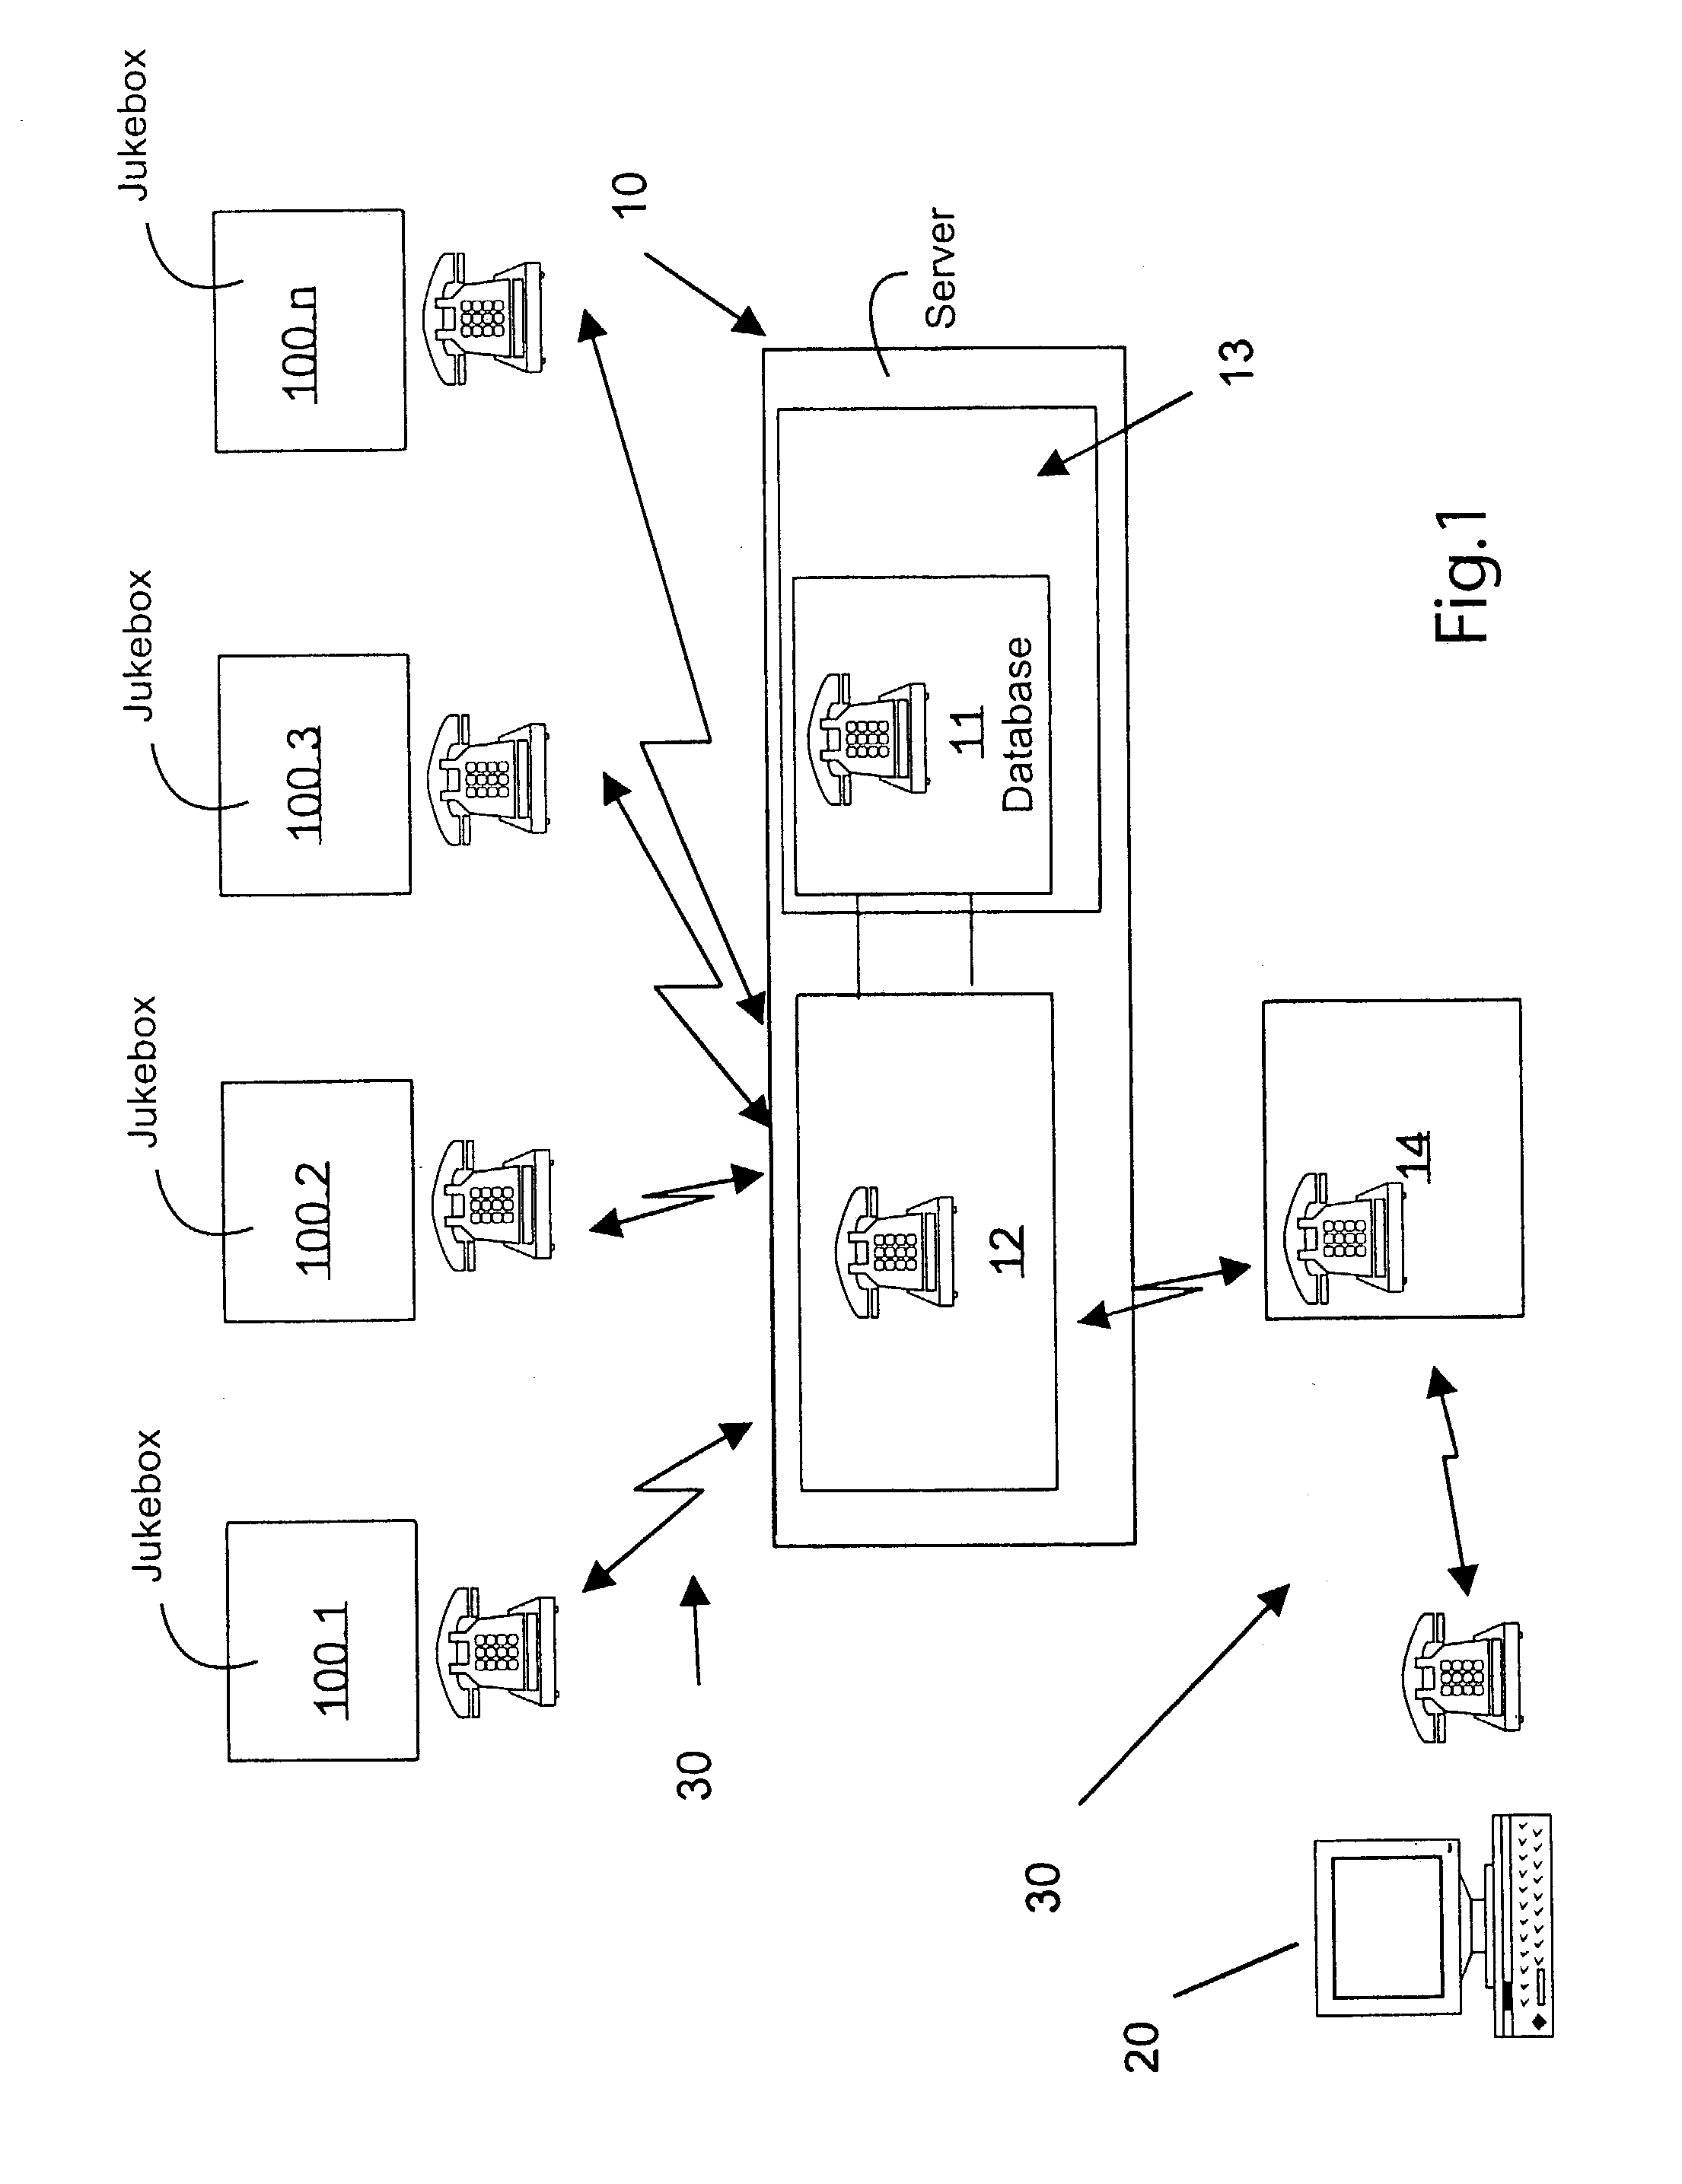 Device and process for remote management of a network of audiovisual information reproduction systems